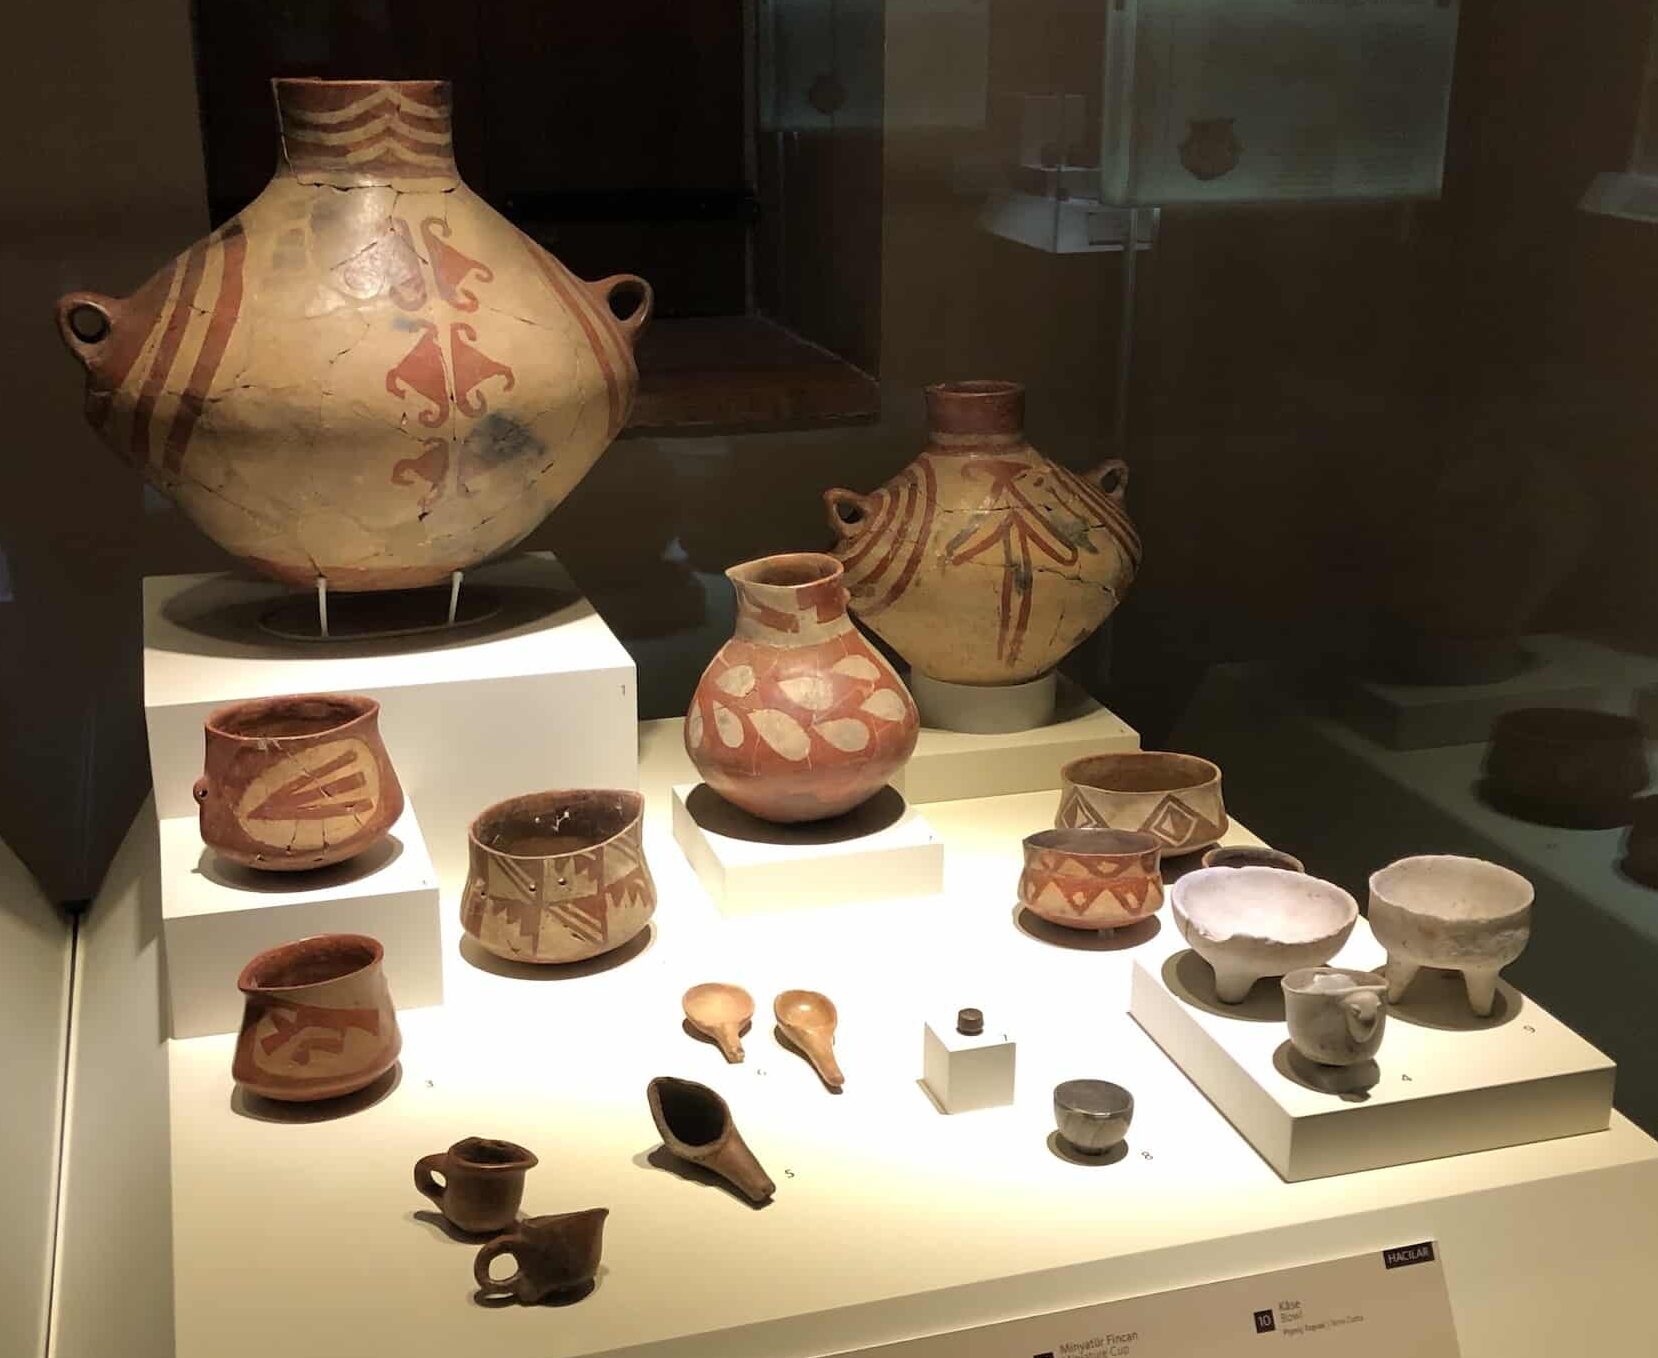 Pottery from Hacılar dating back to the second half of the 6th millennium BC at the Museum of Anatolian Civilizations in Ankara, Turkey